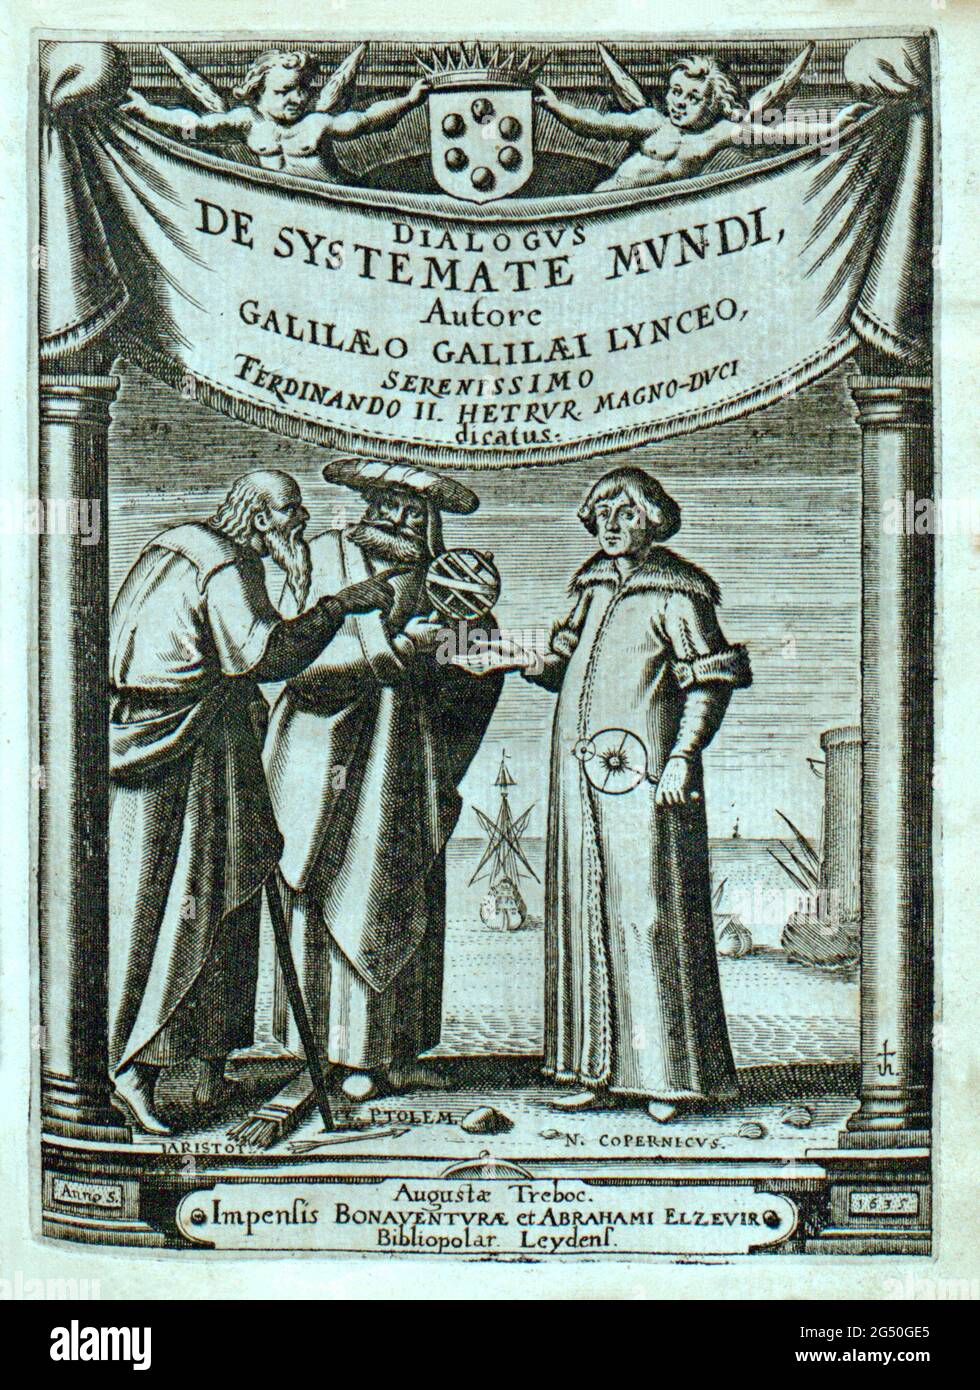 Title page for: Philip van Lansberge, Opera Omnia. Middelburg: 1663. Title  page for a book about astronomy with images of famous astronomers:  Aristarchus Samius, Ptolemeus, Rex Alfonsus, Tycho Brahe, AlbategNius,  Nicolaas Coopernicus